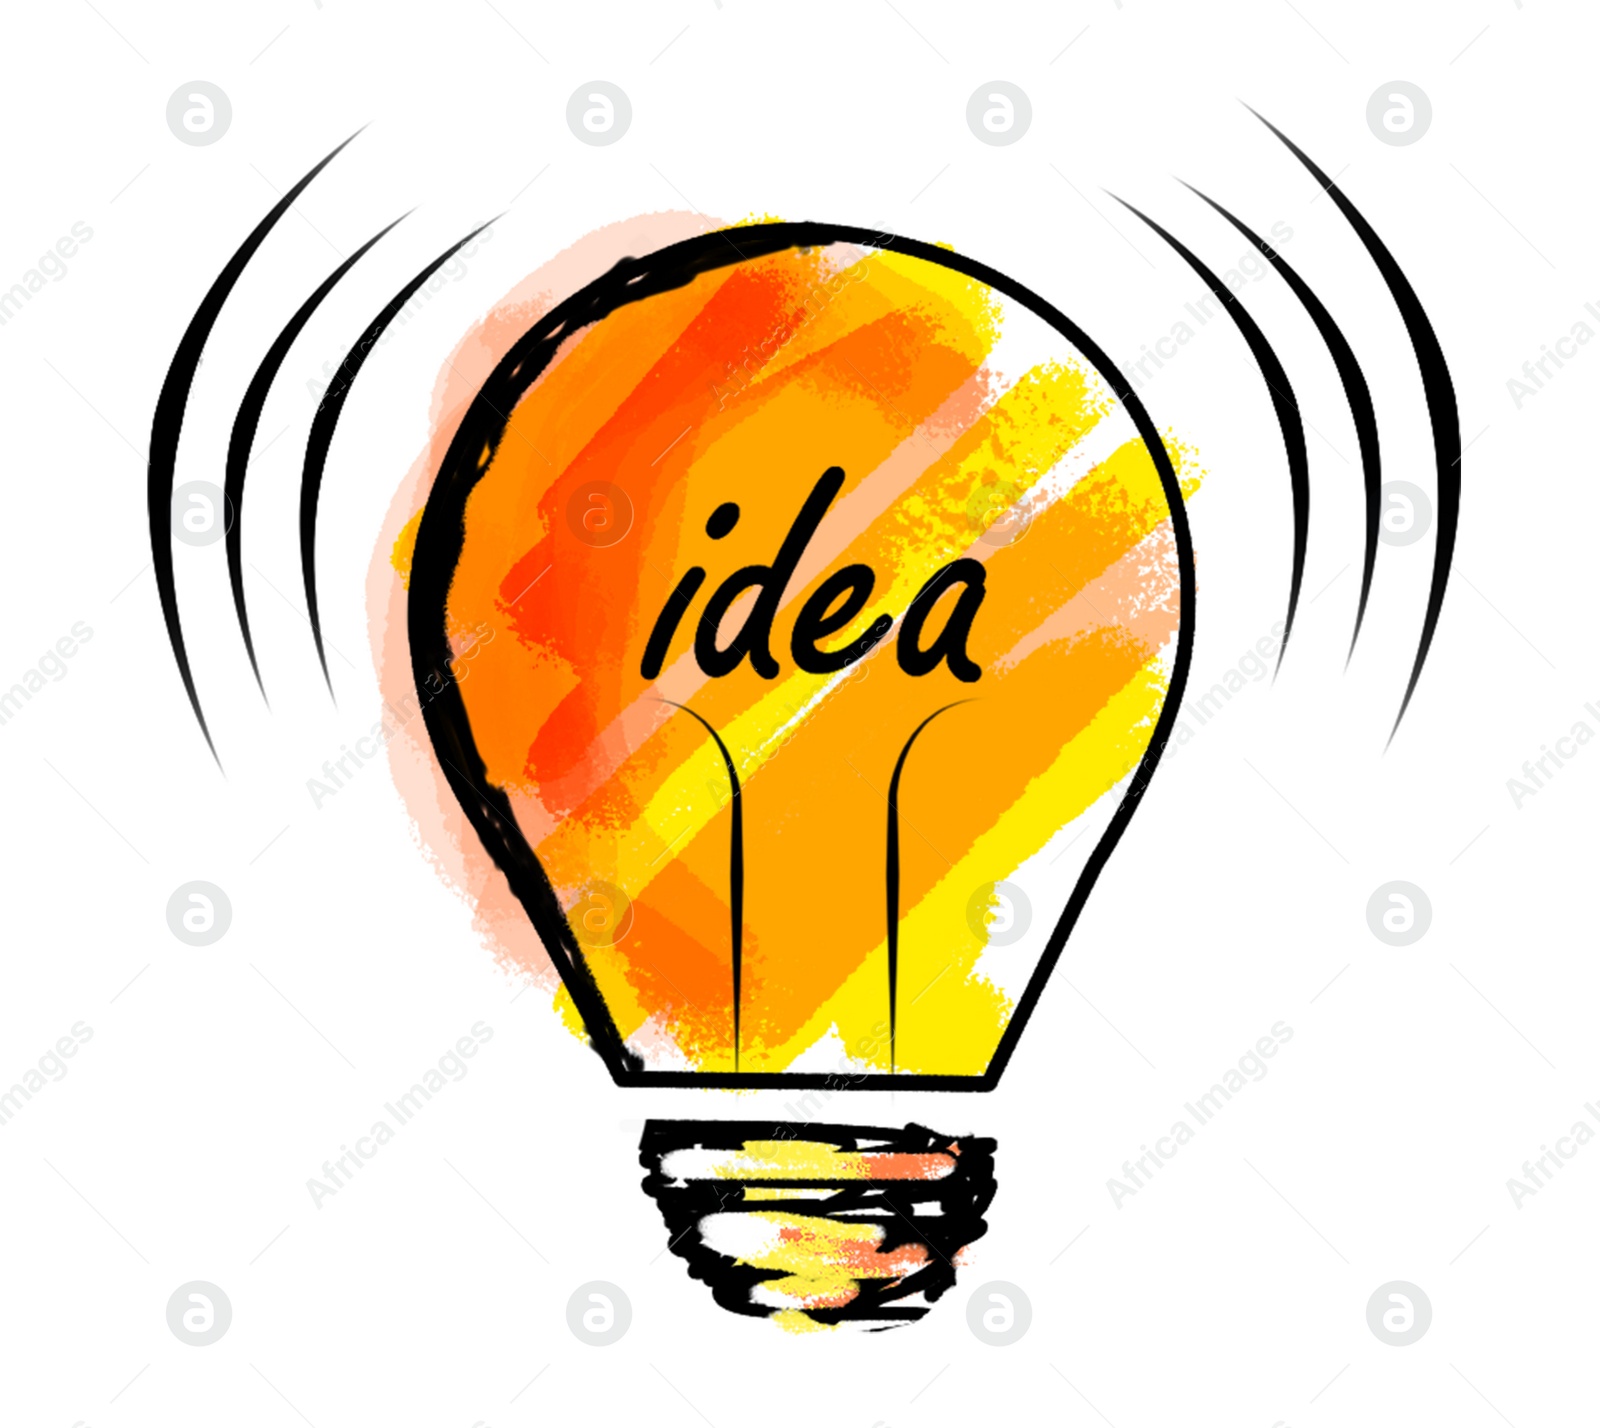 Illustration of Light bulb illustration on white background. Concept of creative idea and innovation